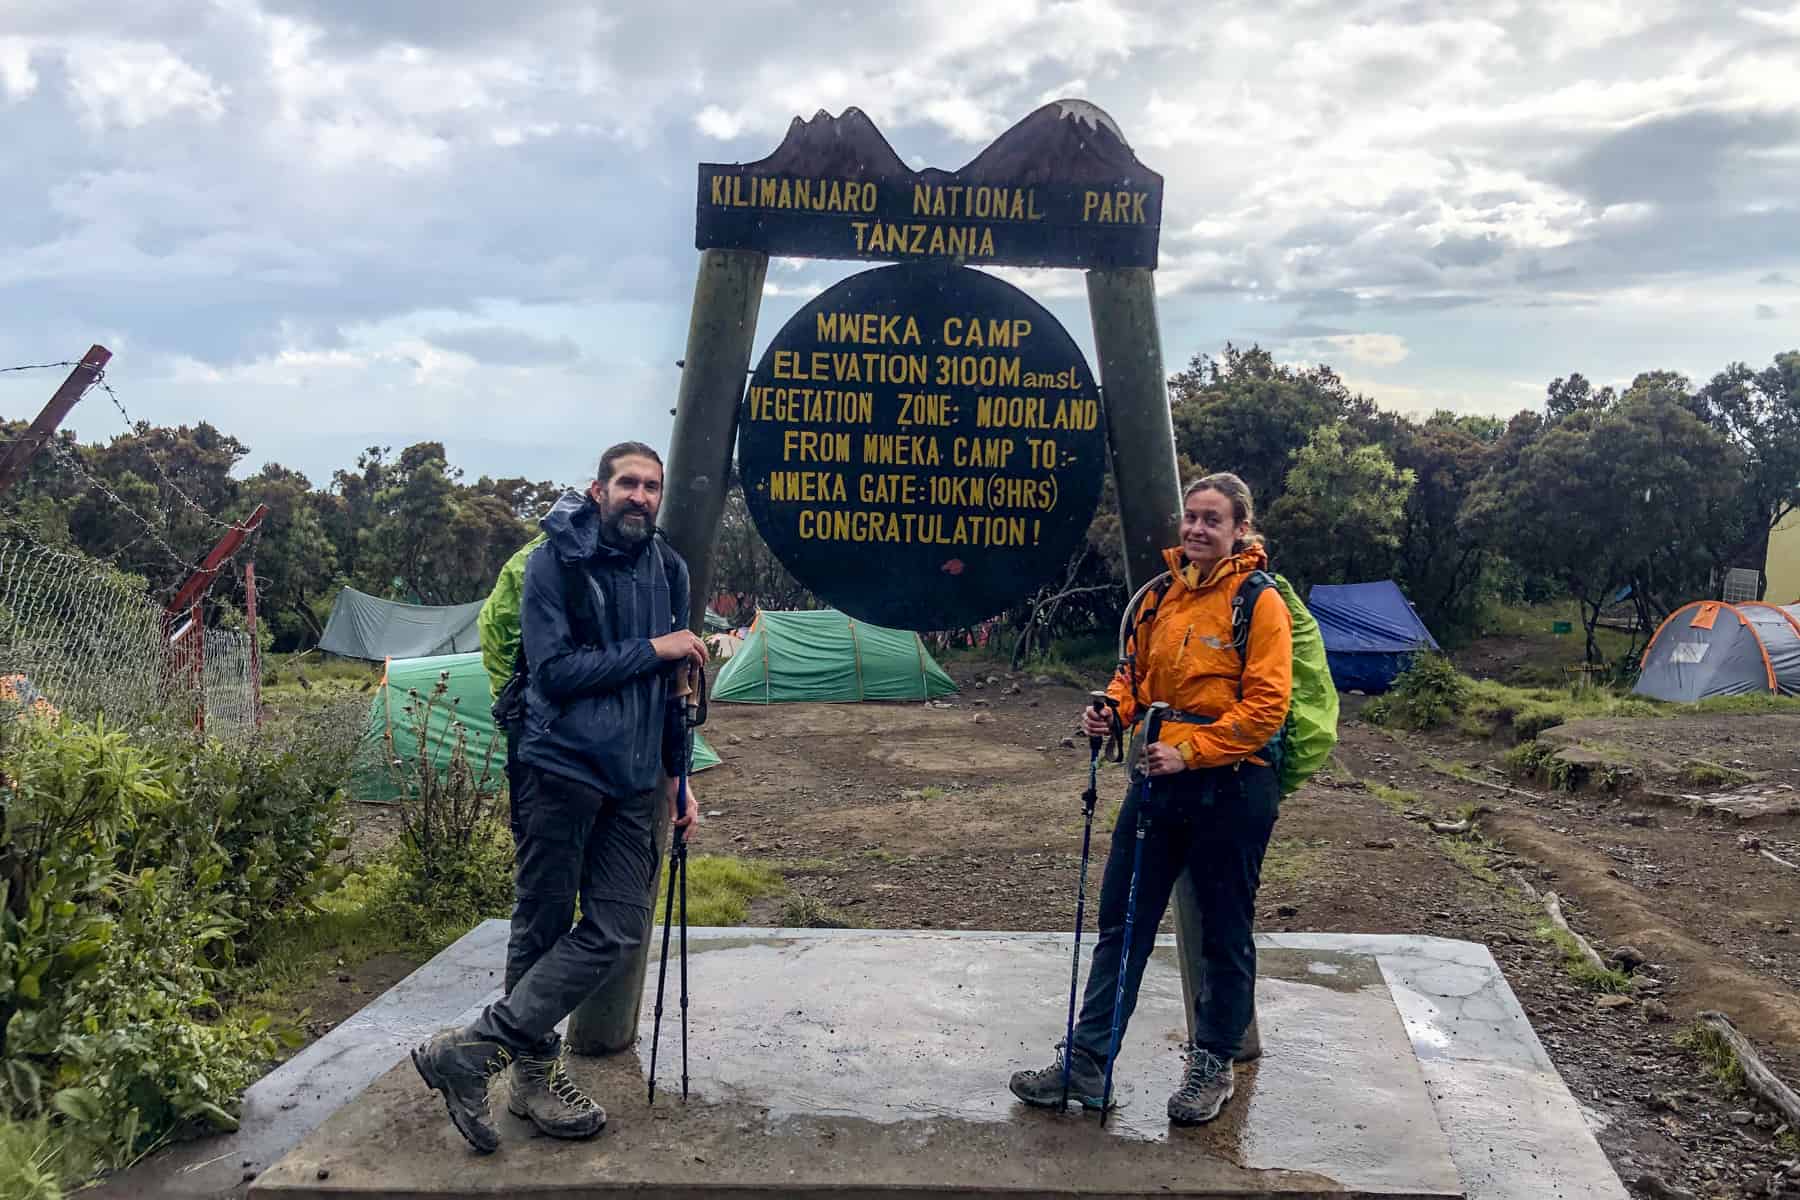 A man and woman, looking extremely tired and holding walking poles, stand in front of the Kilimanjaro Mweka Camp wooden sign. A scattering of tents can be seen in the background. 